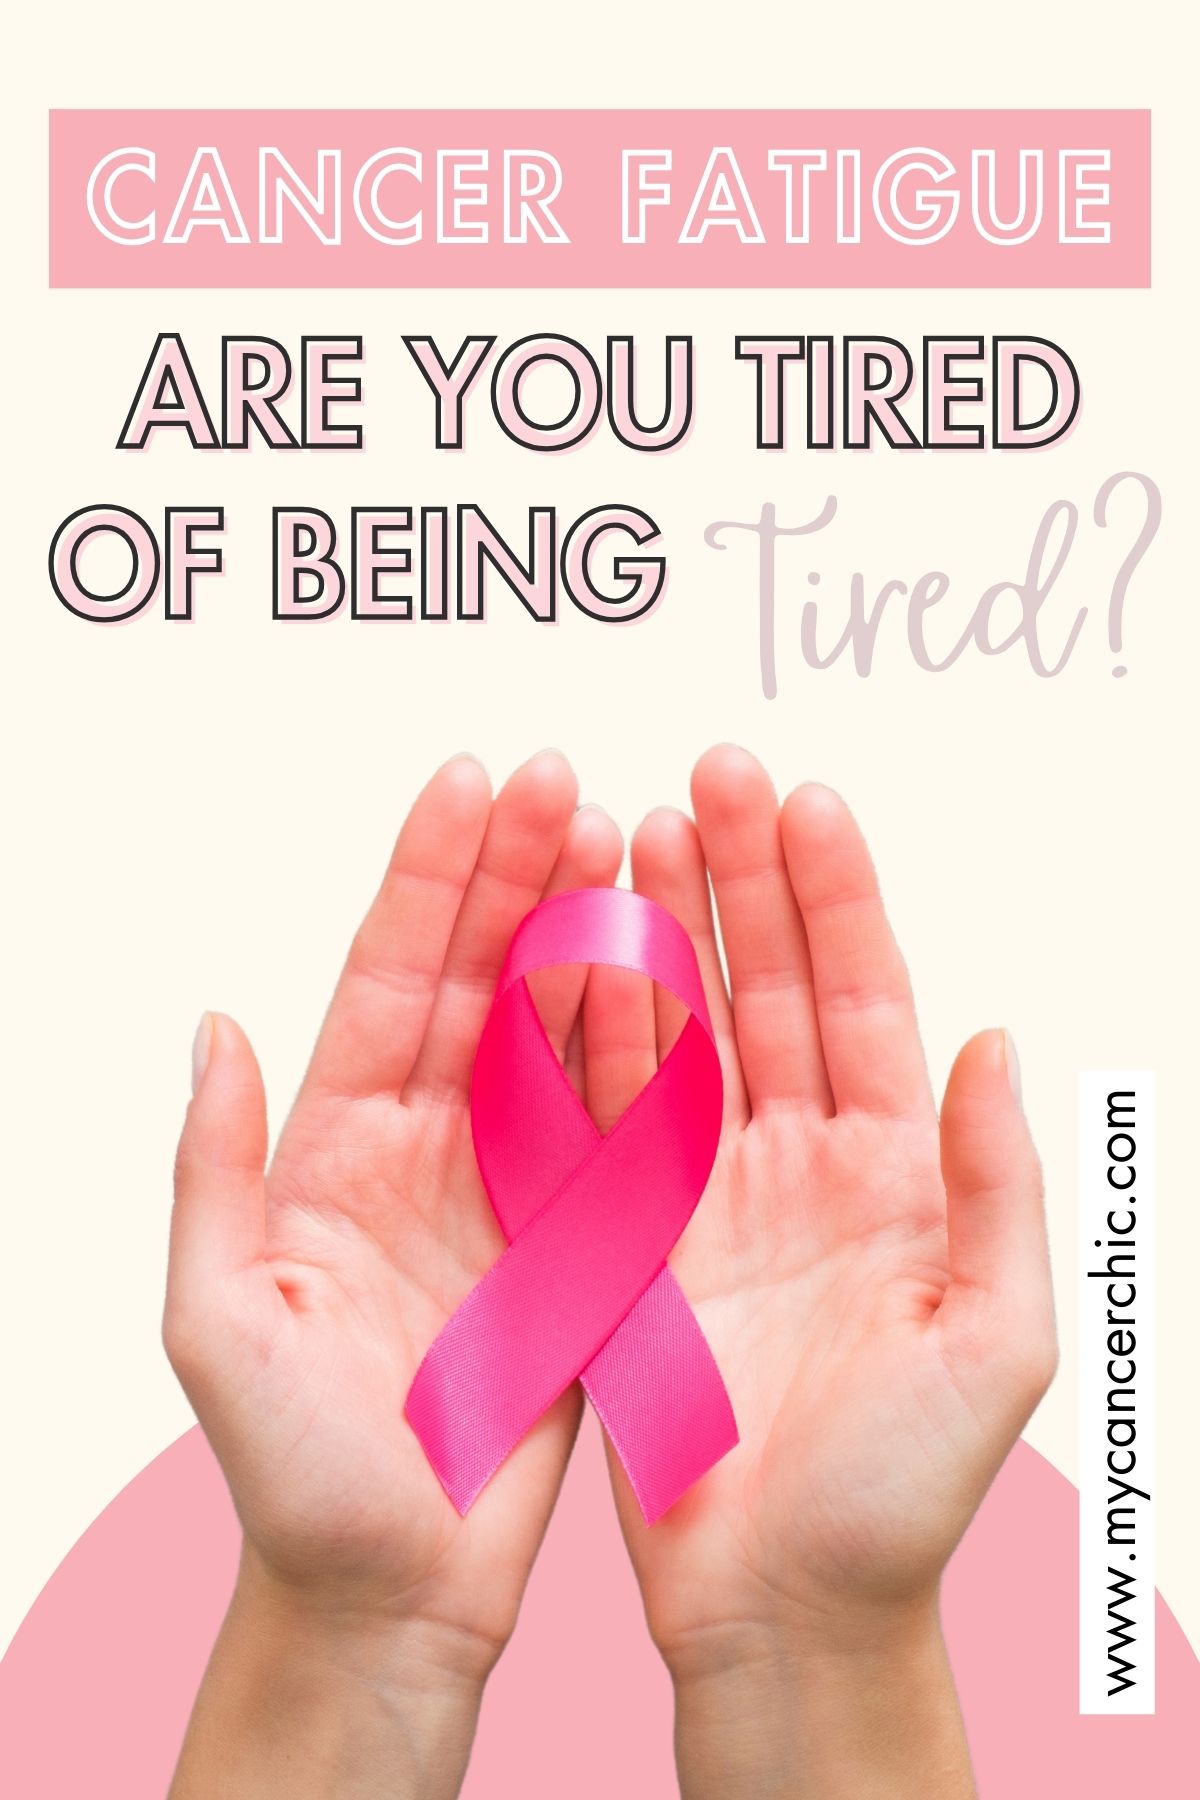 Cancer and Fatigue: Are You Tired of Being Tired?